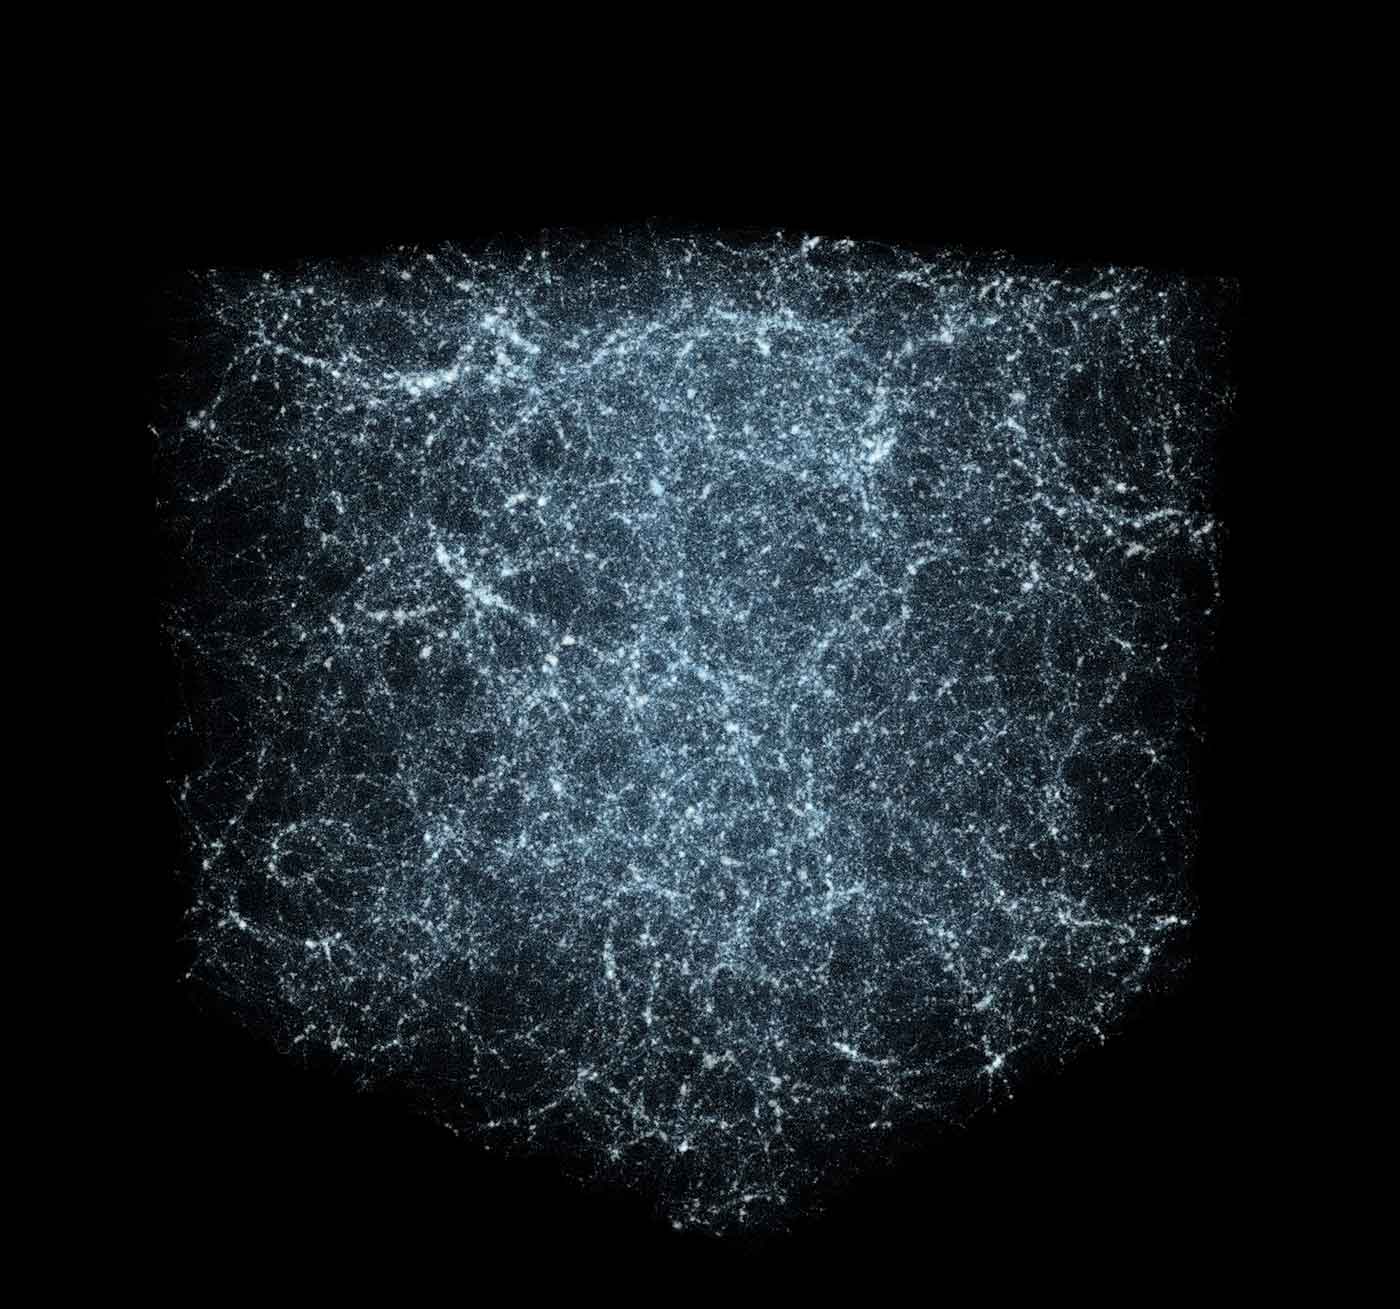 Simulation of the universe.